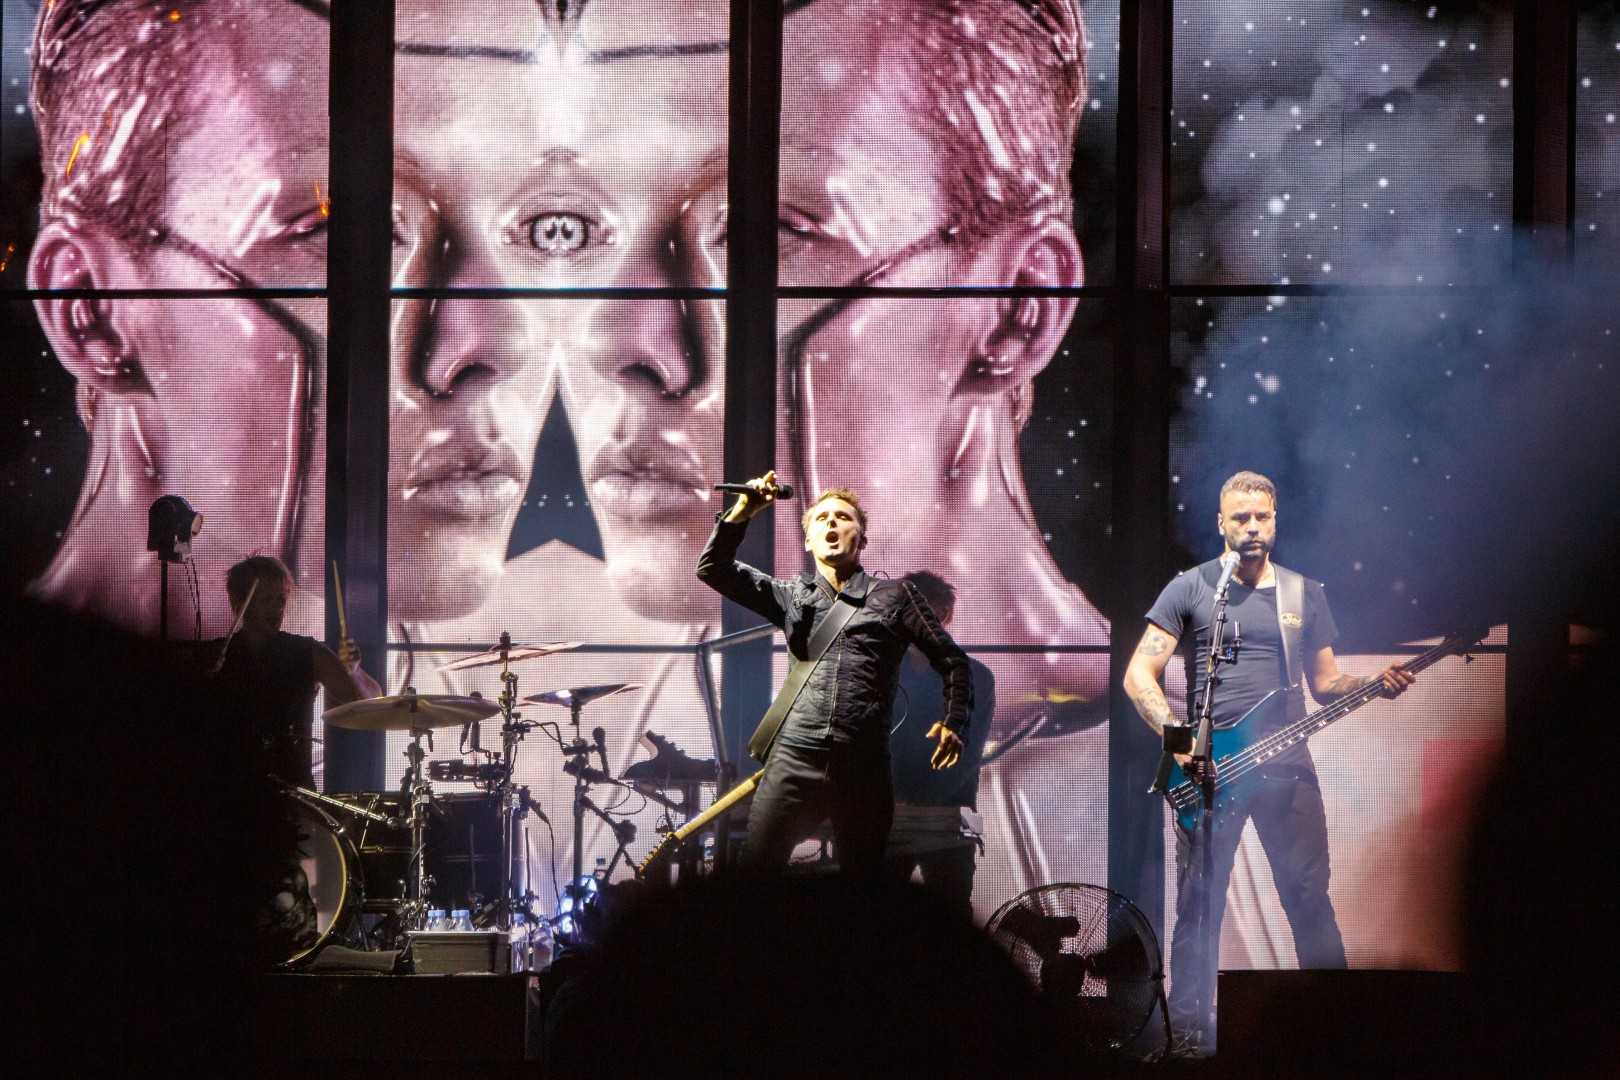 Muse at Piața Constituției in Bucharest on July 29, 2016 (37ab5e9bc9)